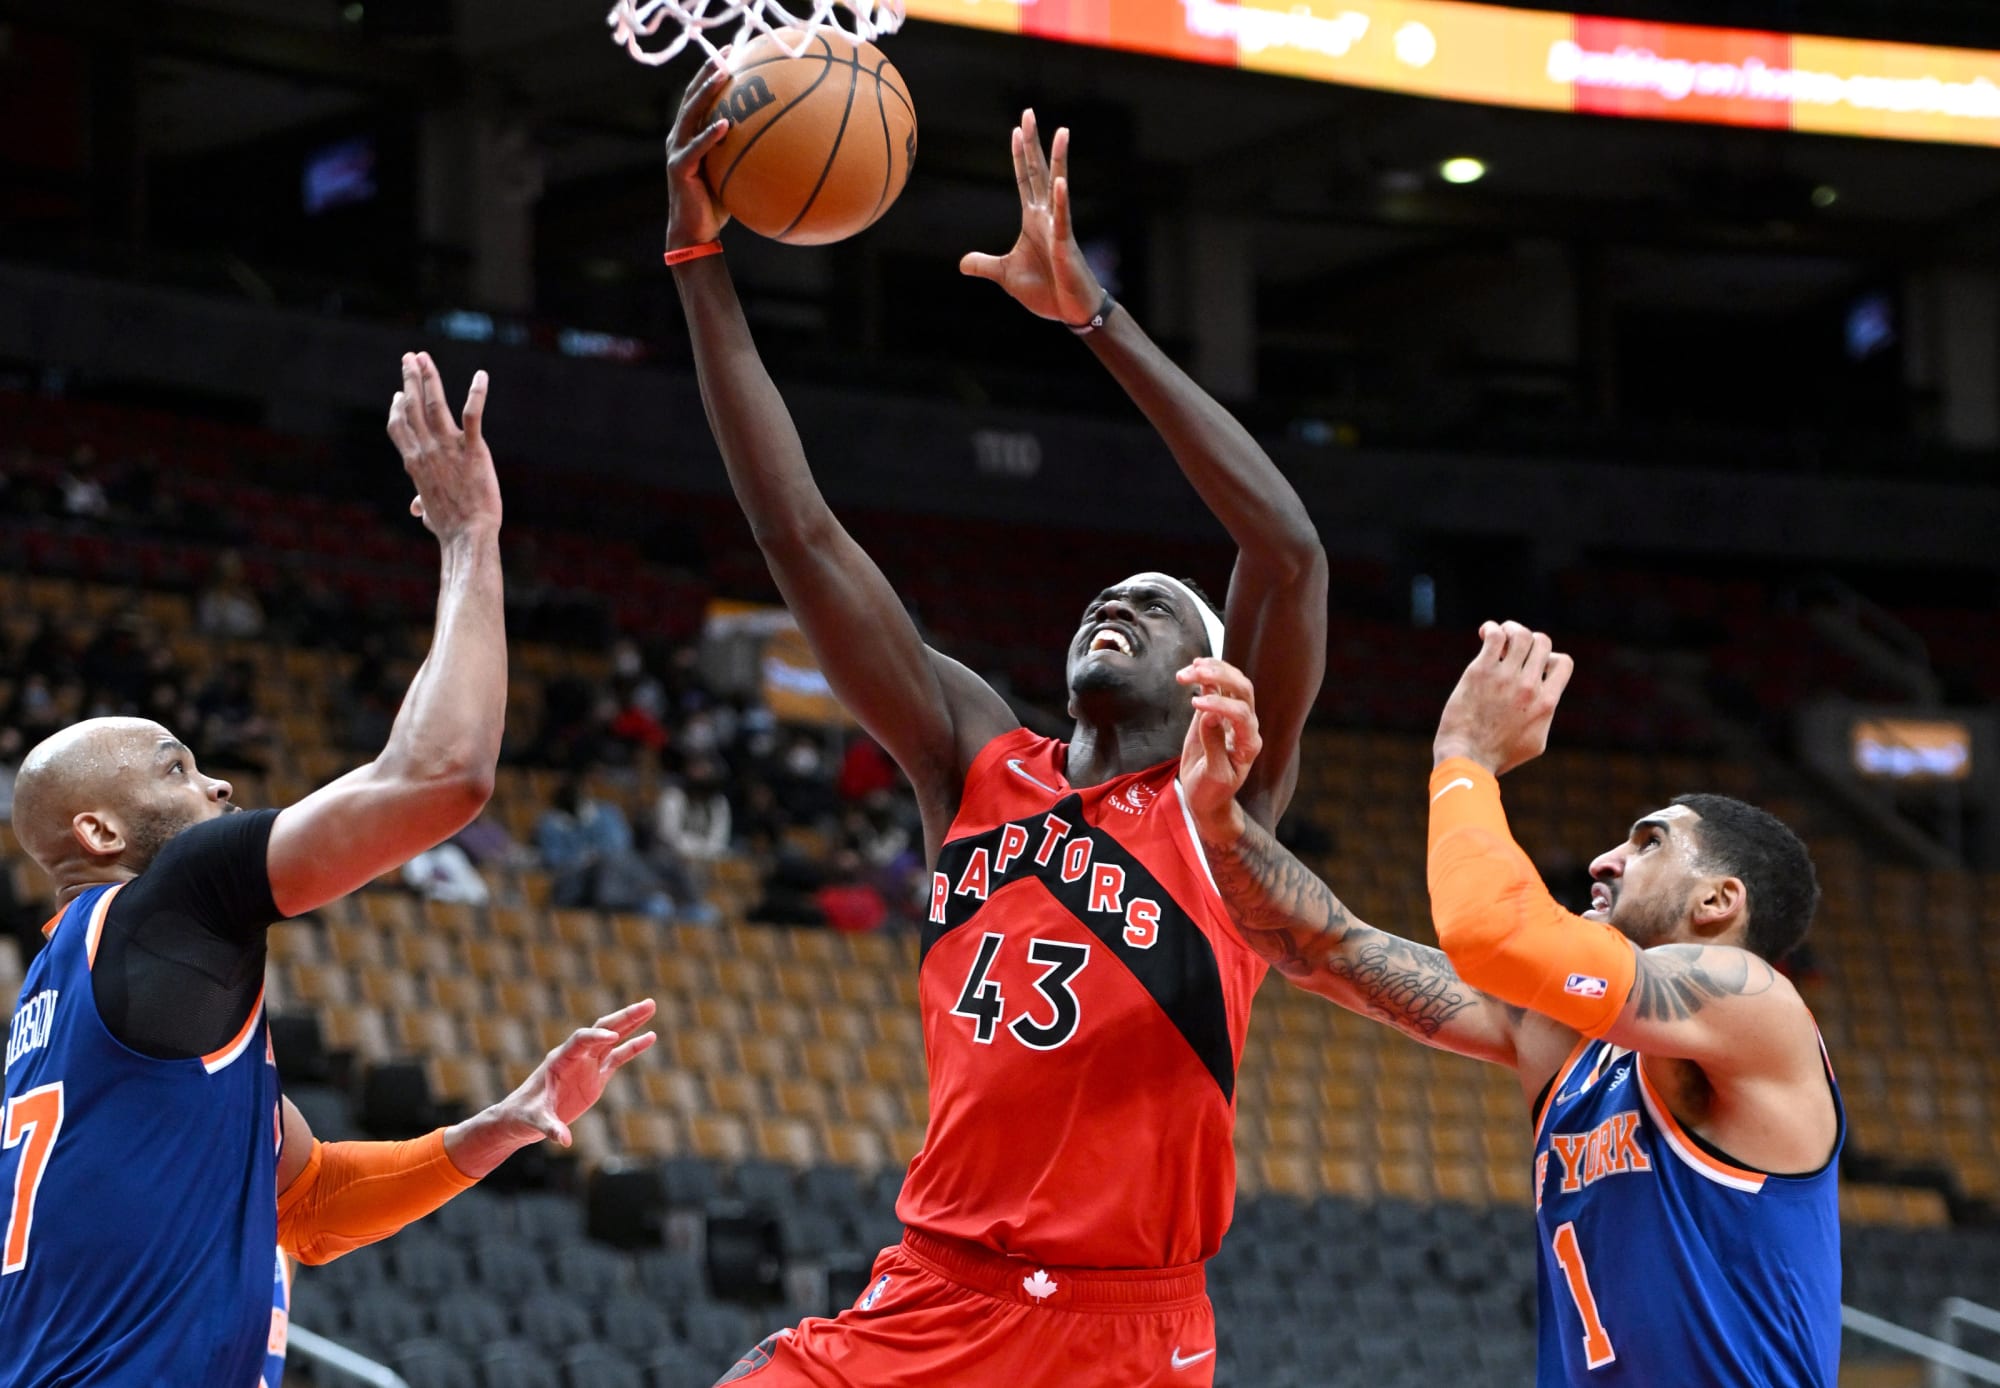 Pascal Siakam became a Top 5 all-time Raptors player on Sunday